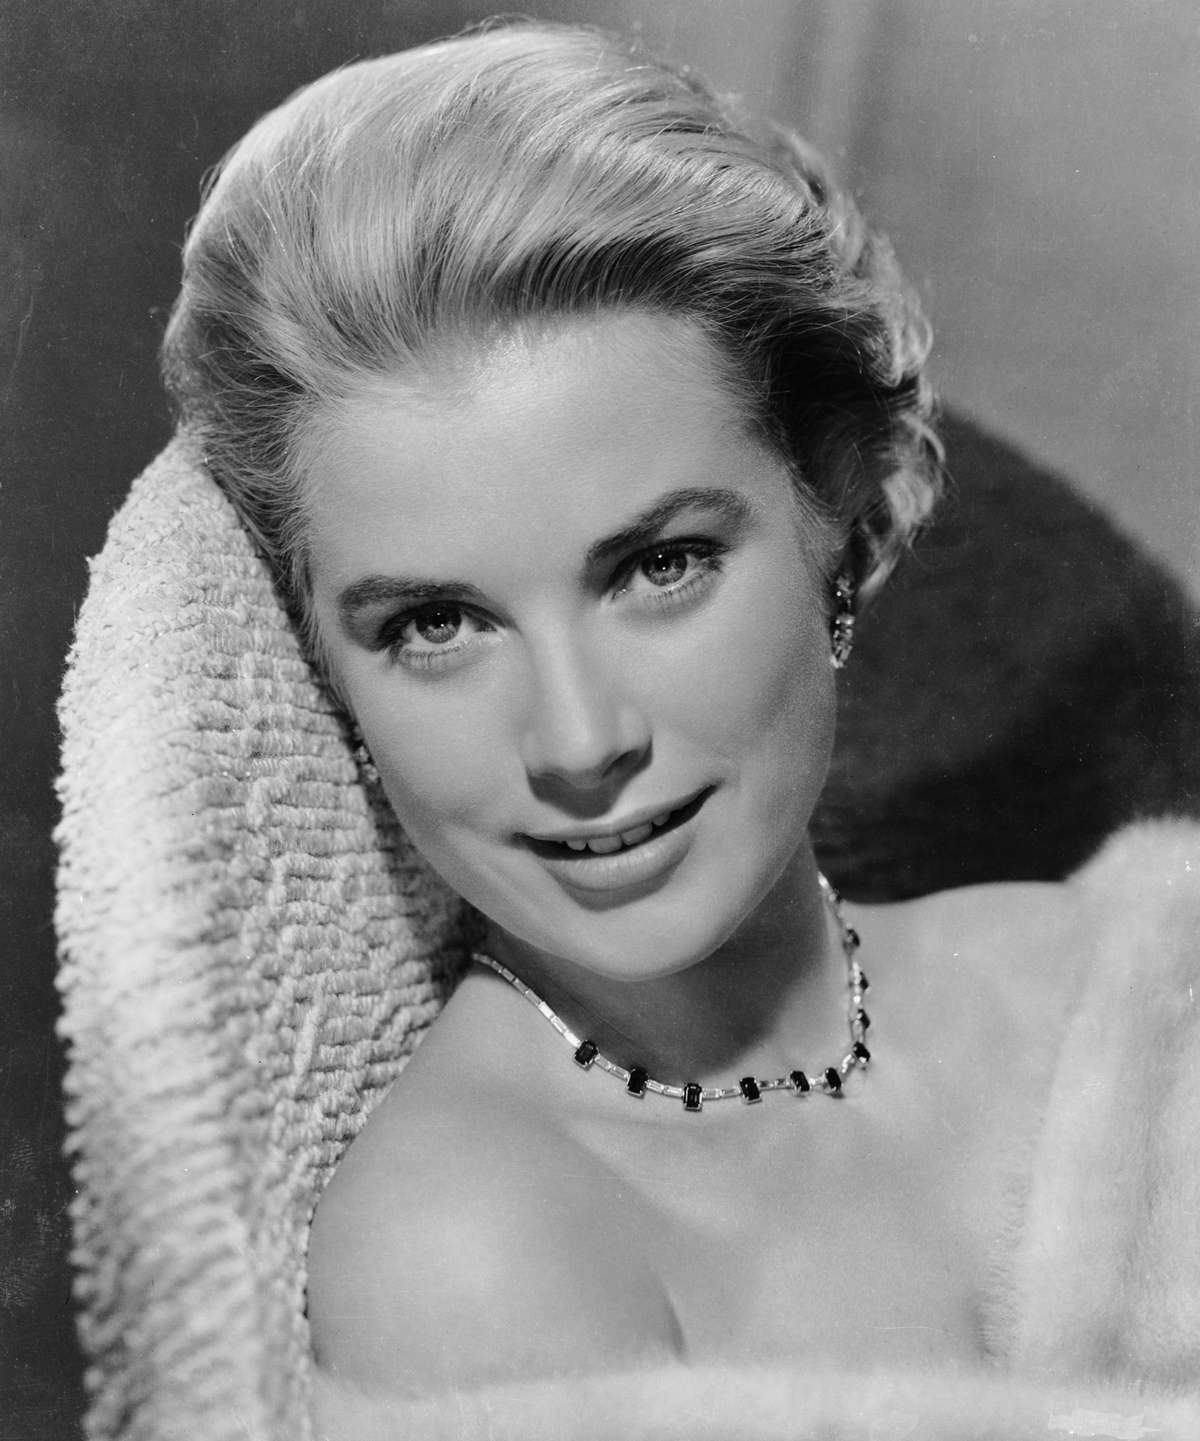 20th May 1954:  American actress Grace Kelly (1929 - 1982).  (Photo by Virgil Apger/John Kobal Foundation/Getty Images)